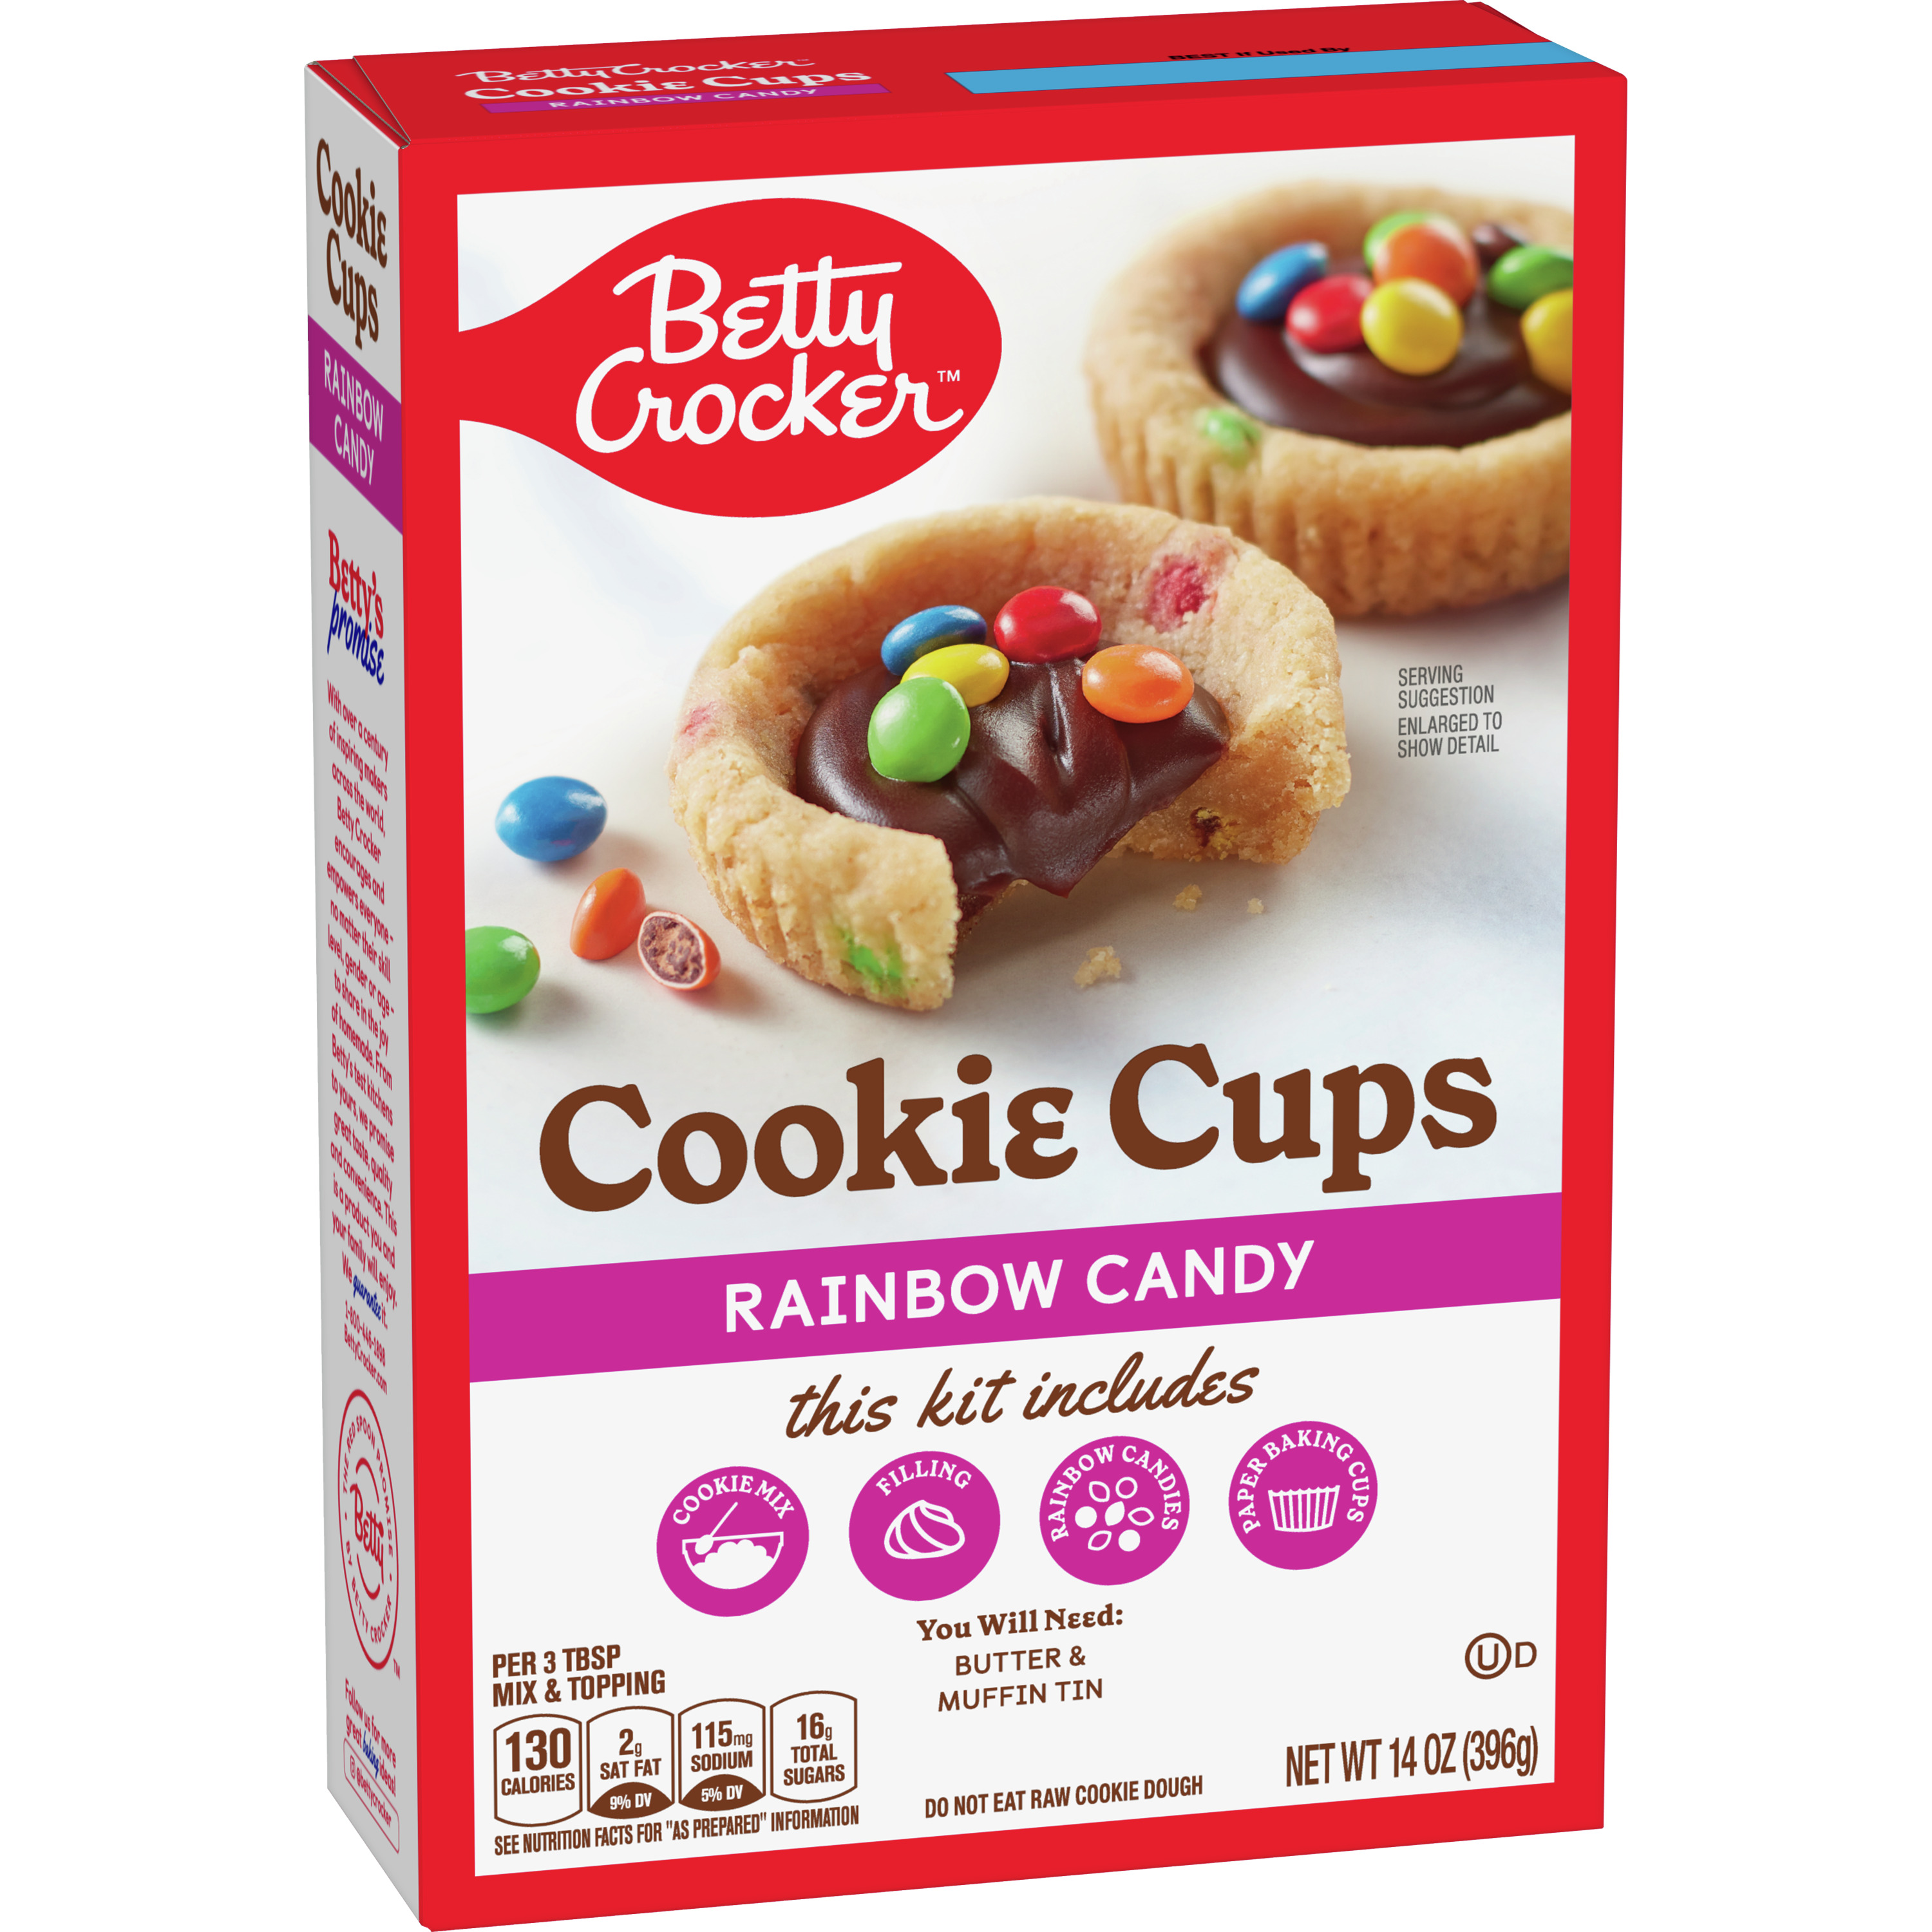 Betty Crocker Ready to Bake Rainbow Candy Cookie Cups, 14 oz - image 3 of 11